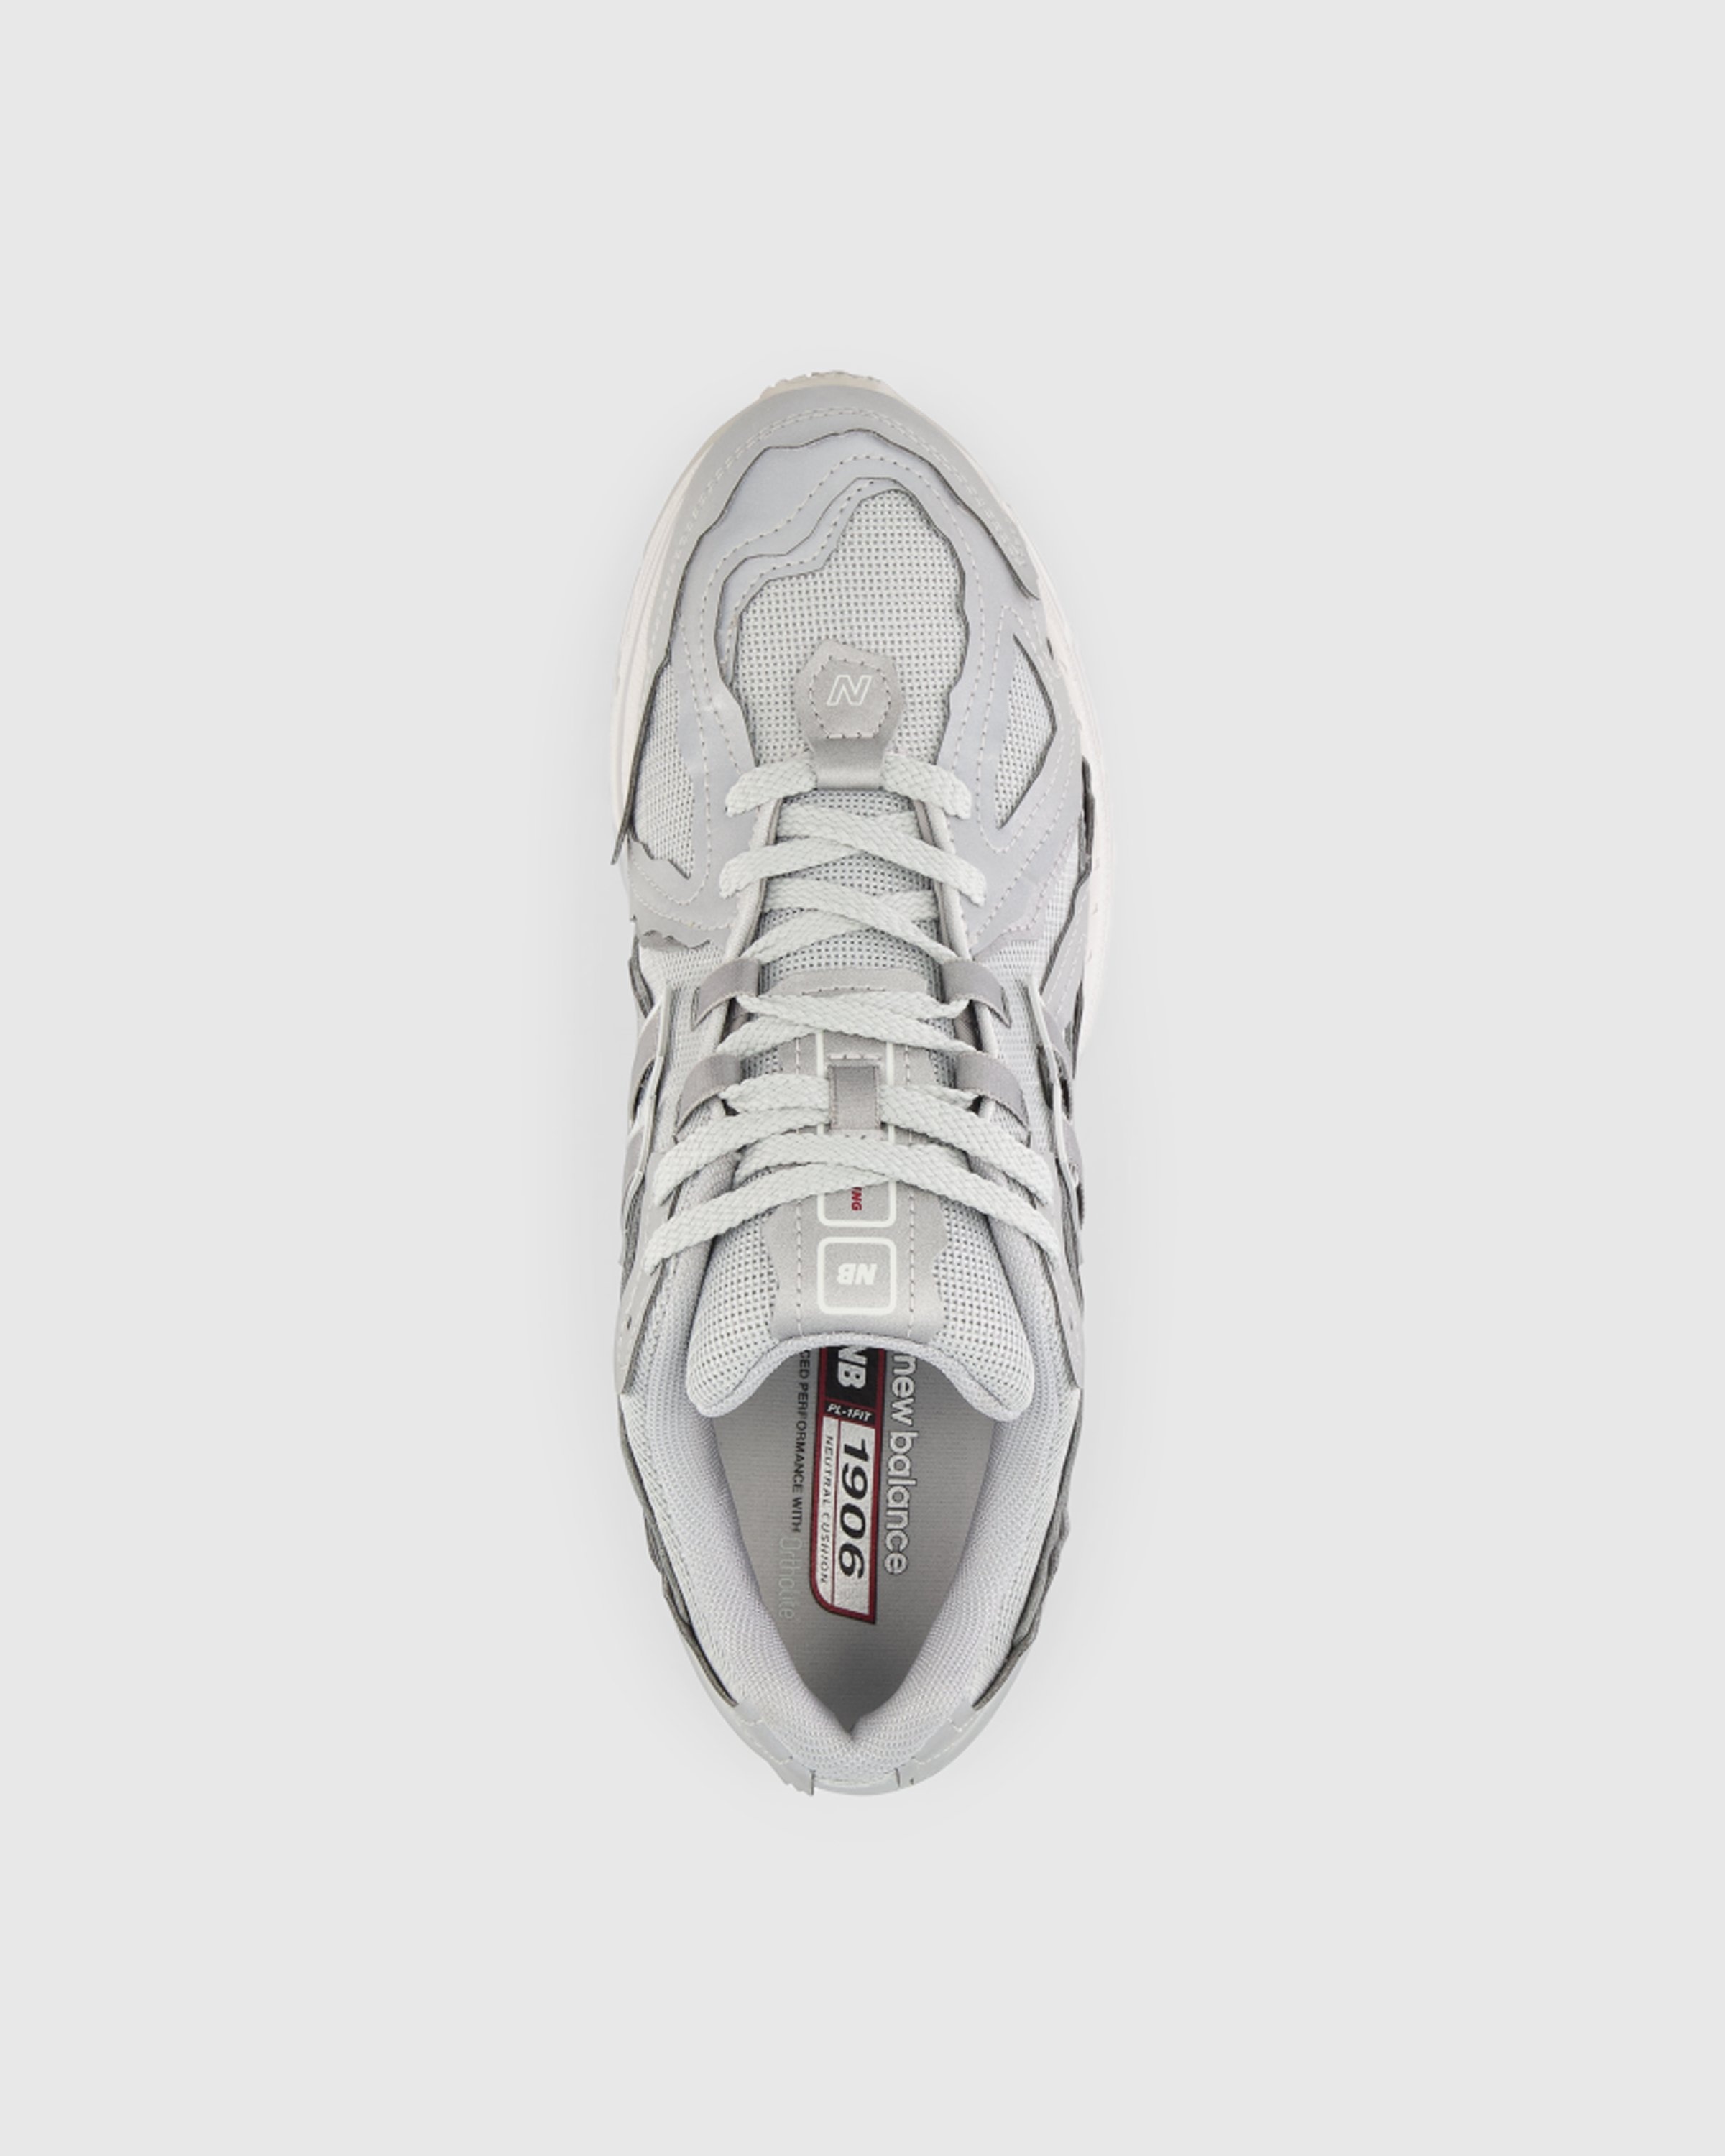 New Balance – 1906 DH Silver Metallic - Sneakers - Silver - Image 4